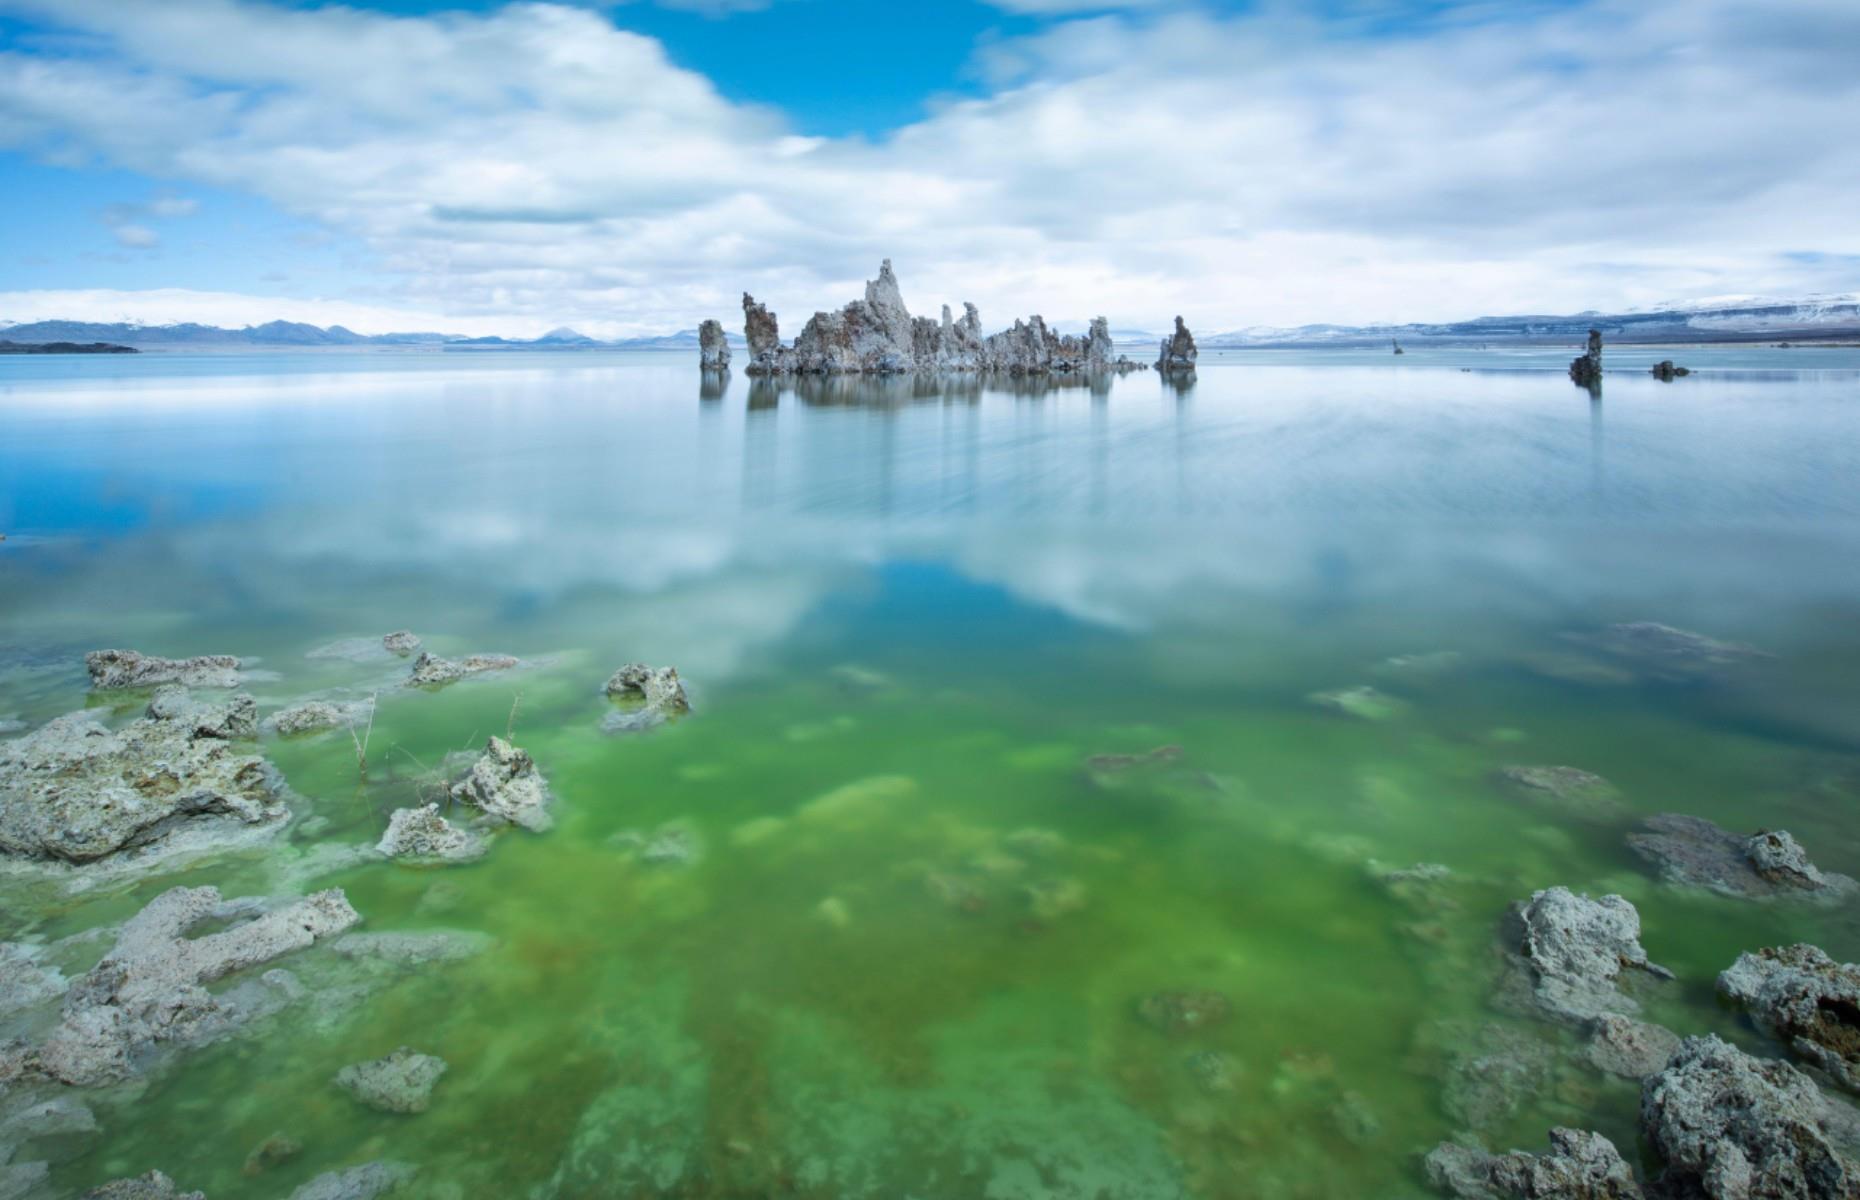 <p>There are so many curiosities about California’s Mono Lake that it’s hard to know where to begin. For one, the 65-square-mile (168sq km) body of water is filled with hulking tufa towers which look like they've landed from Mars (they’re actually formed by underground springs). Another striking feature is its bright green hue. While it's know that this is a result of algal blooms, which reproduce due to the higher salt and alkaline levels that occur when the lake dries up, there’s still some mystery surrounding this process.</p>